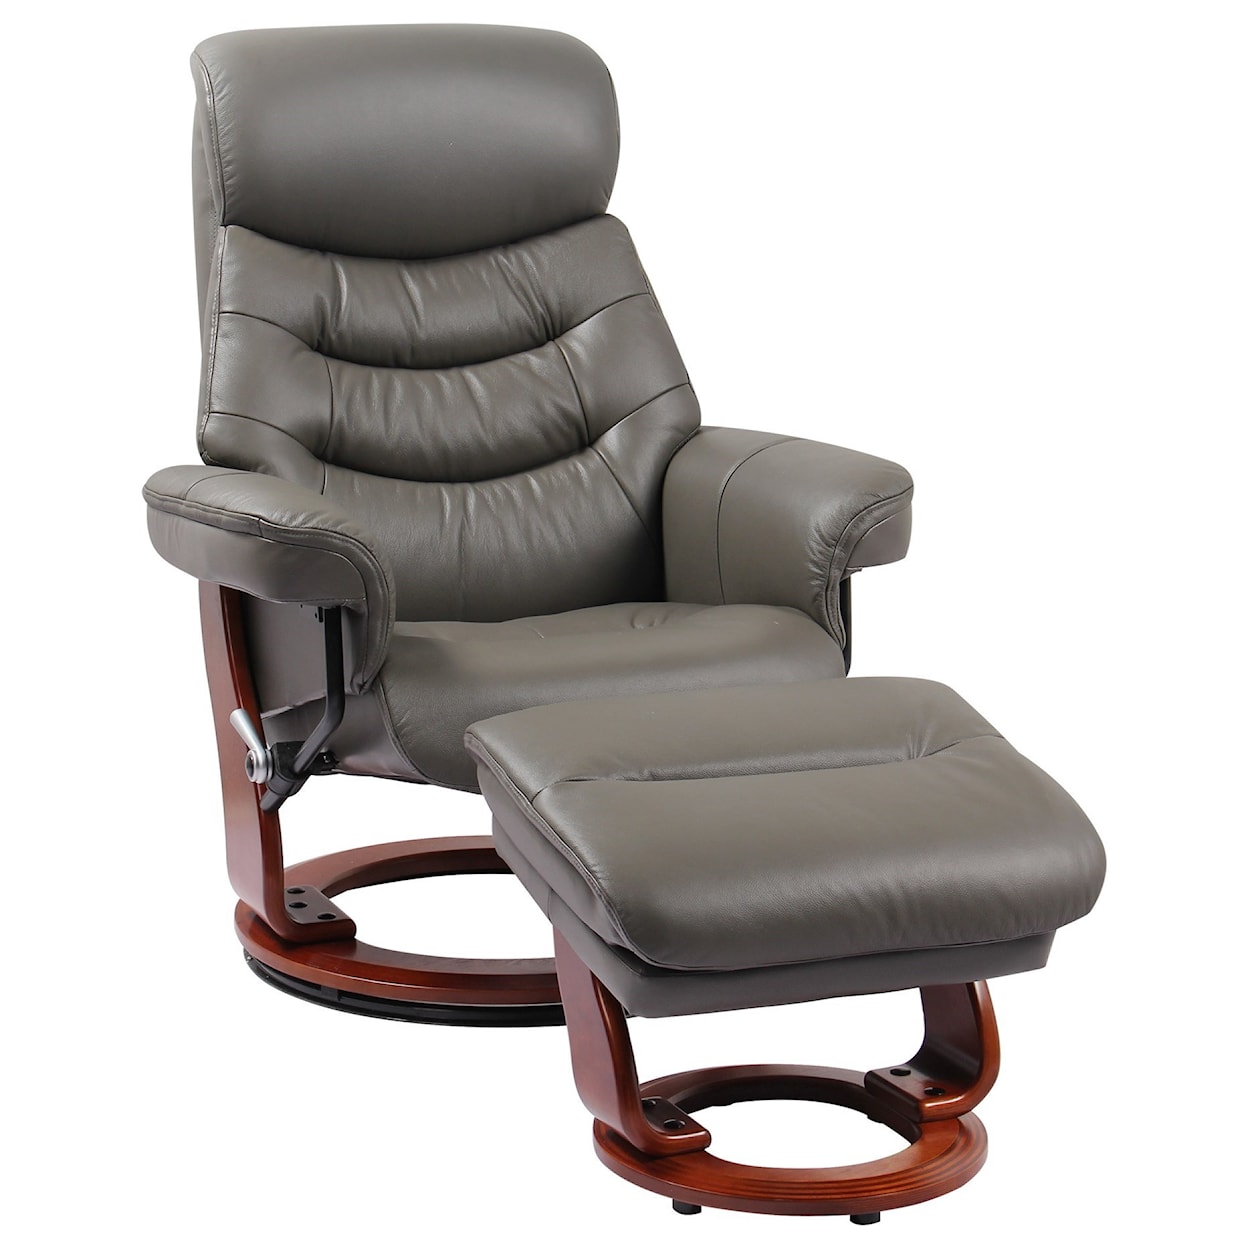 Benchmaster Happy Reclining Chair and Ottoman